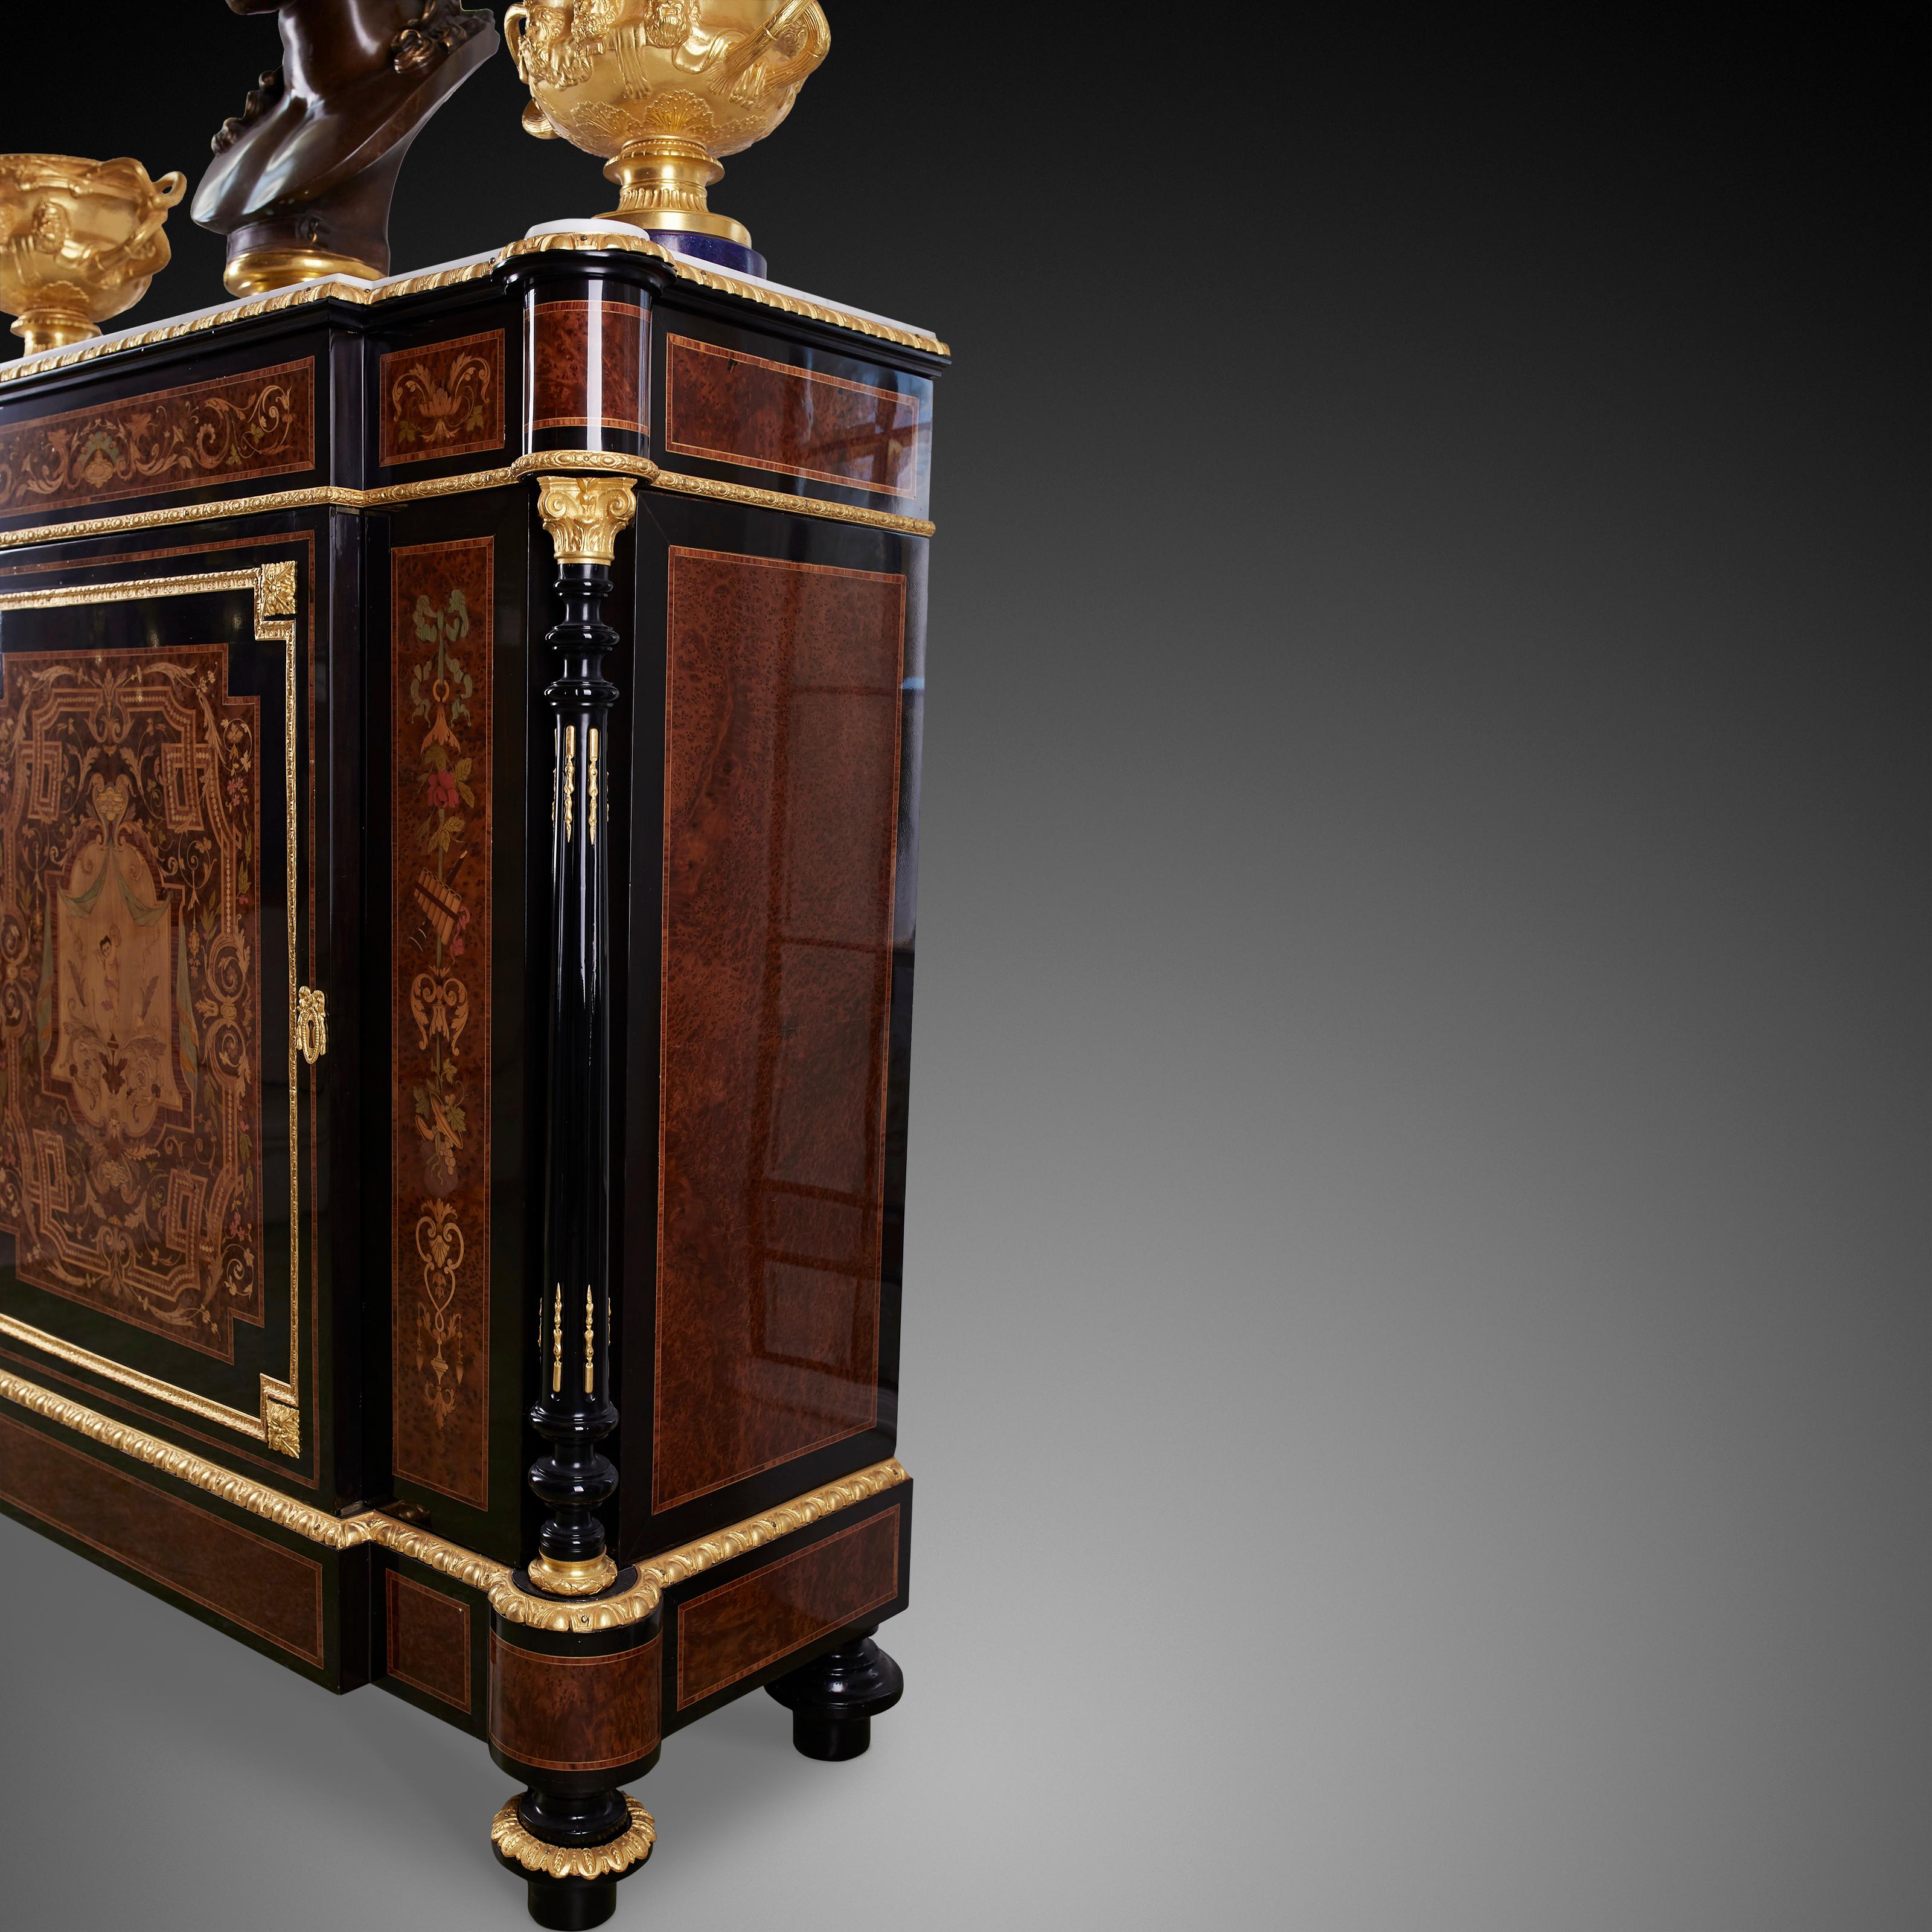 A stunning French 19th century Napoleon III period ebony, ormolu, marble and exotic wood cabinet. The cabinet is raised by elegant topie shaped feet with fine foliate ormolu bands. The base displays beautiful fitted rectangular burl walnut designs